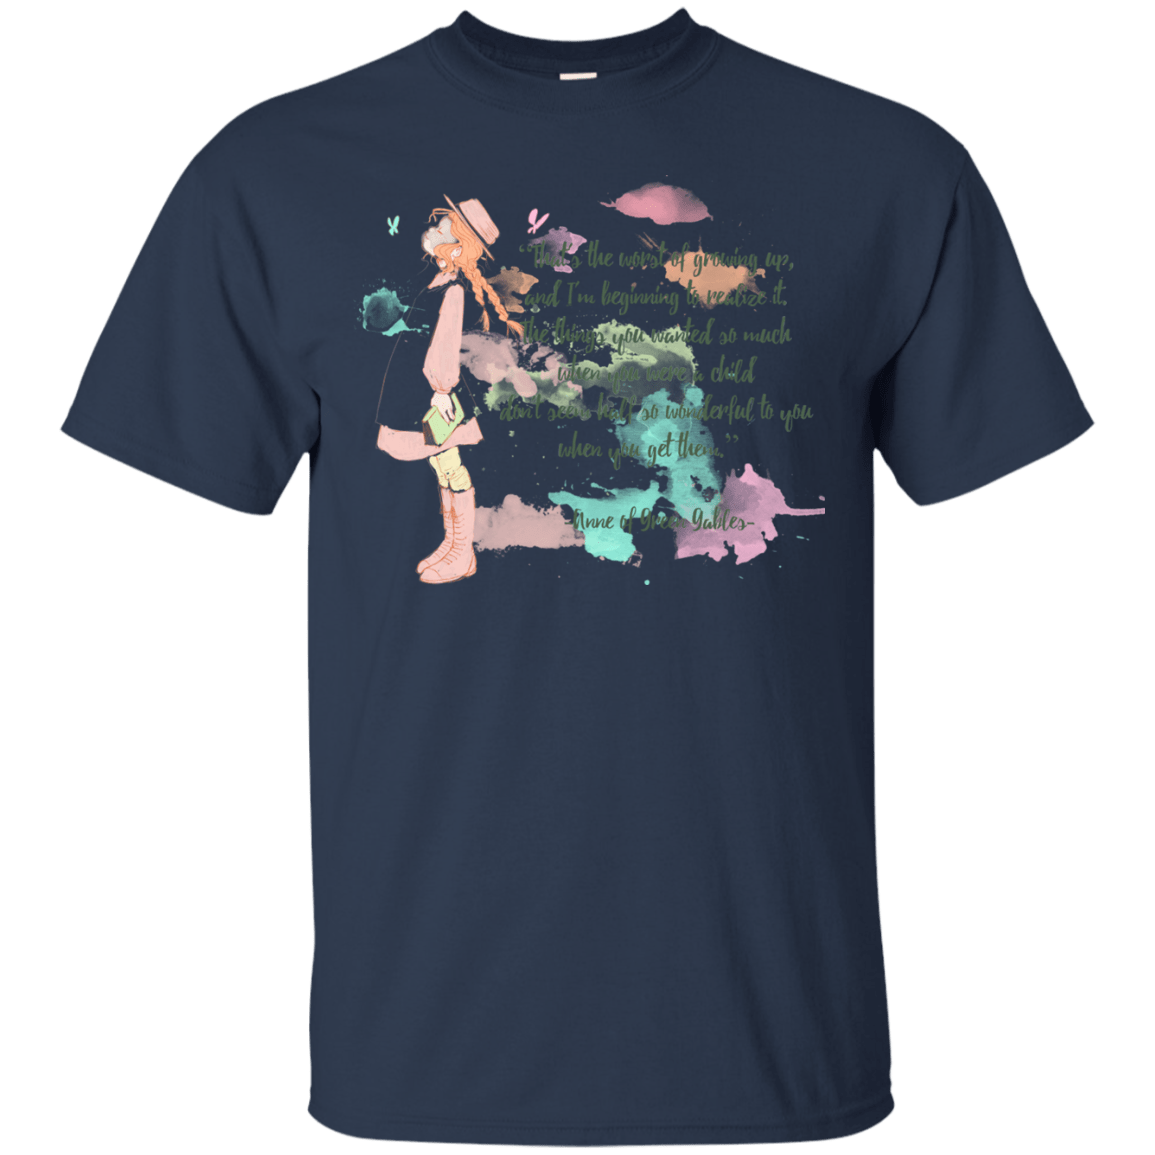 T-Shirts Navy / Small Anne of Green Gables 5 T-Shirt